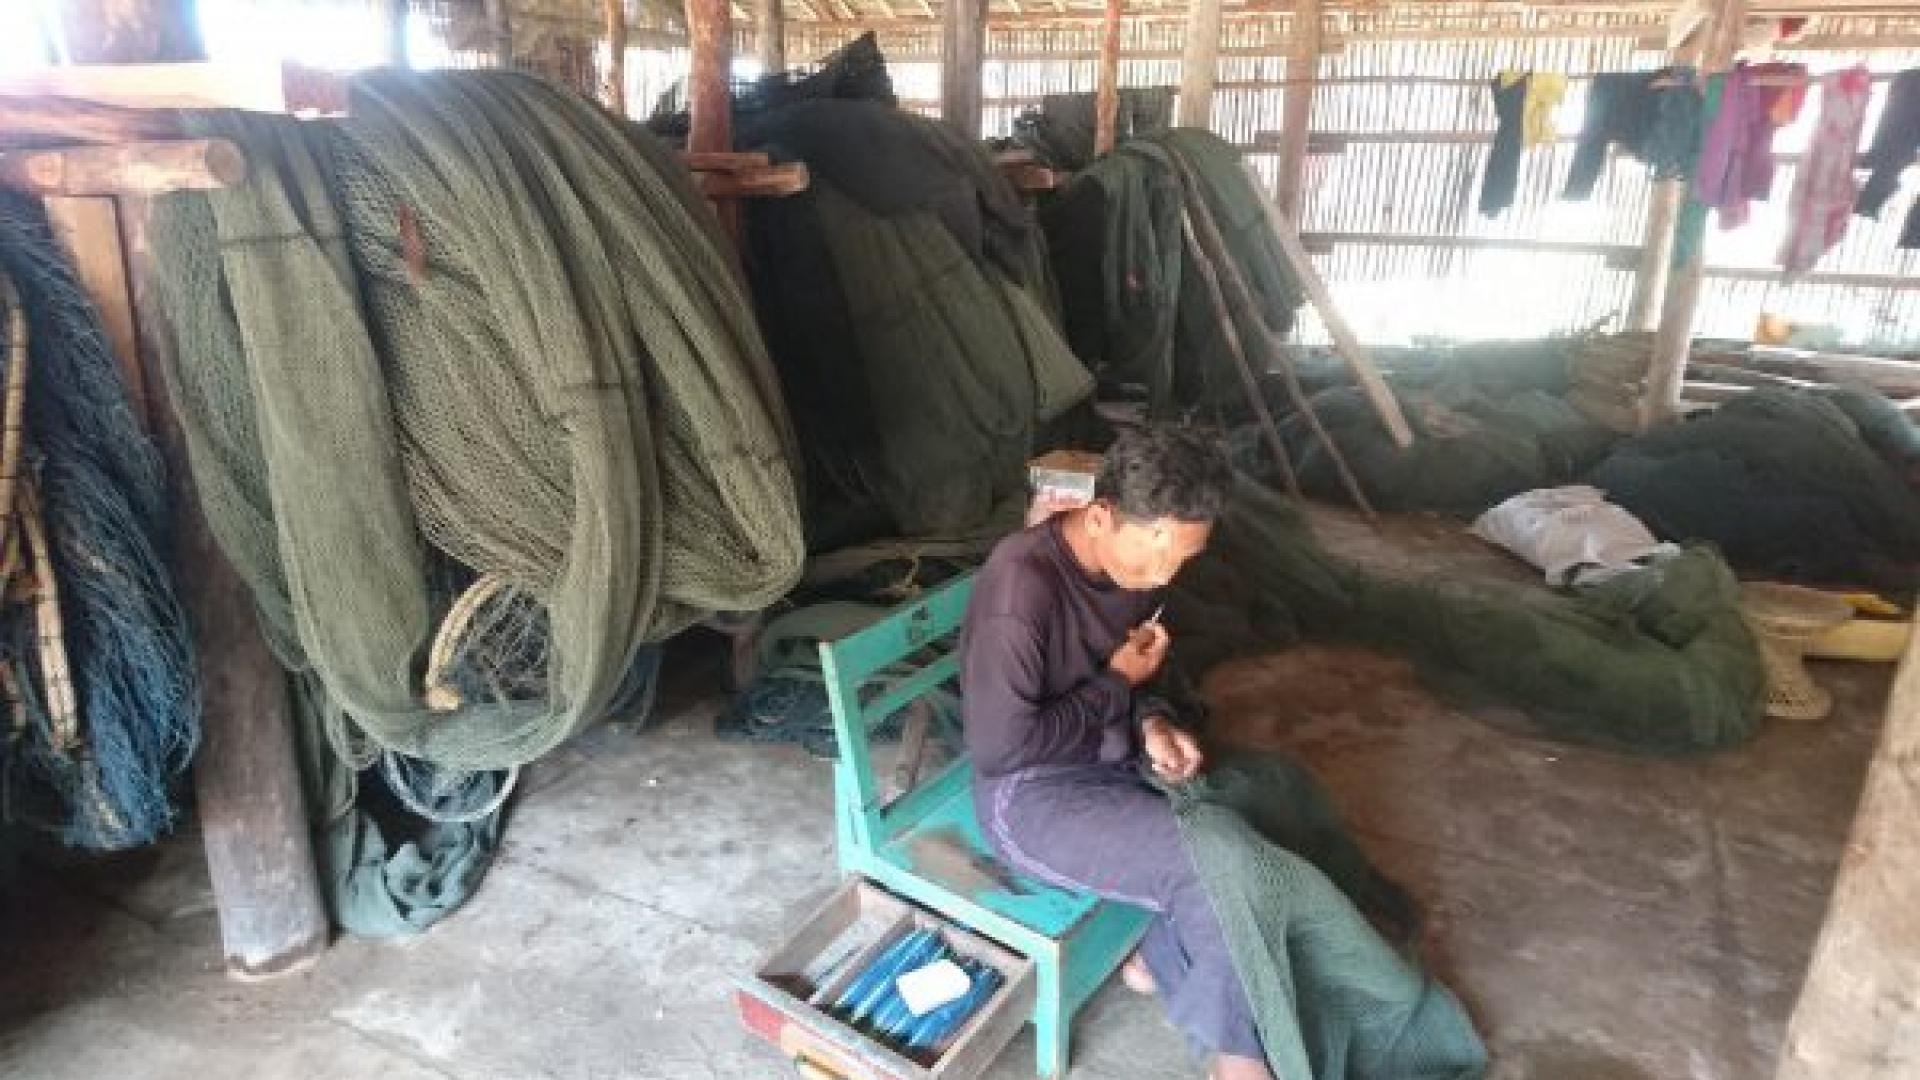 A fishery worker sewing nets that are used for shrimp fishing